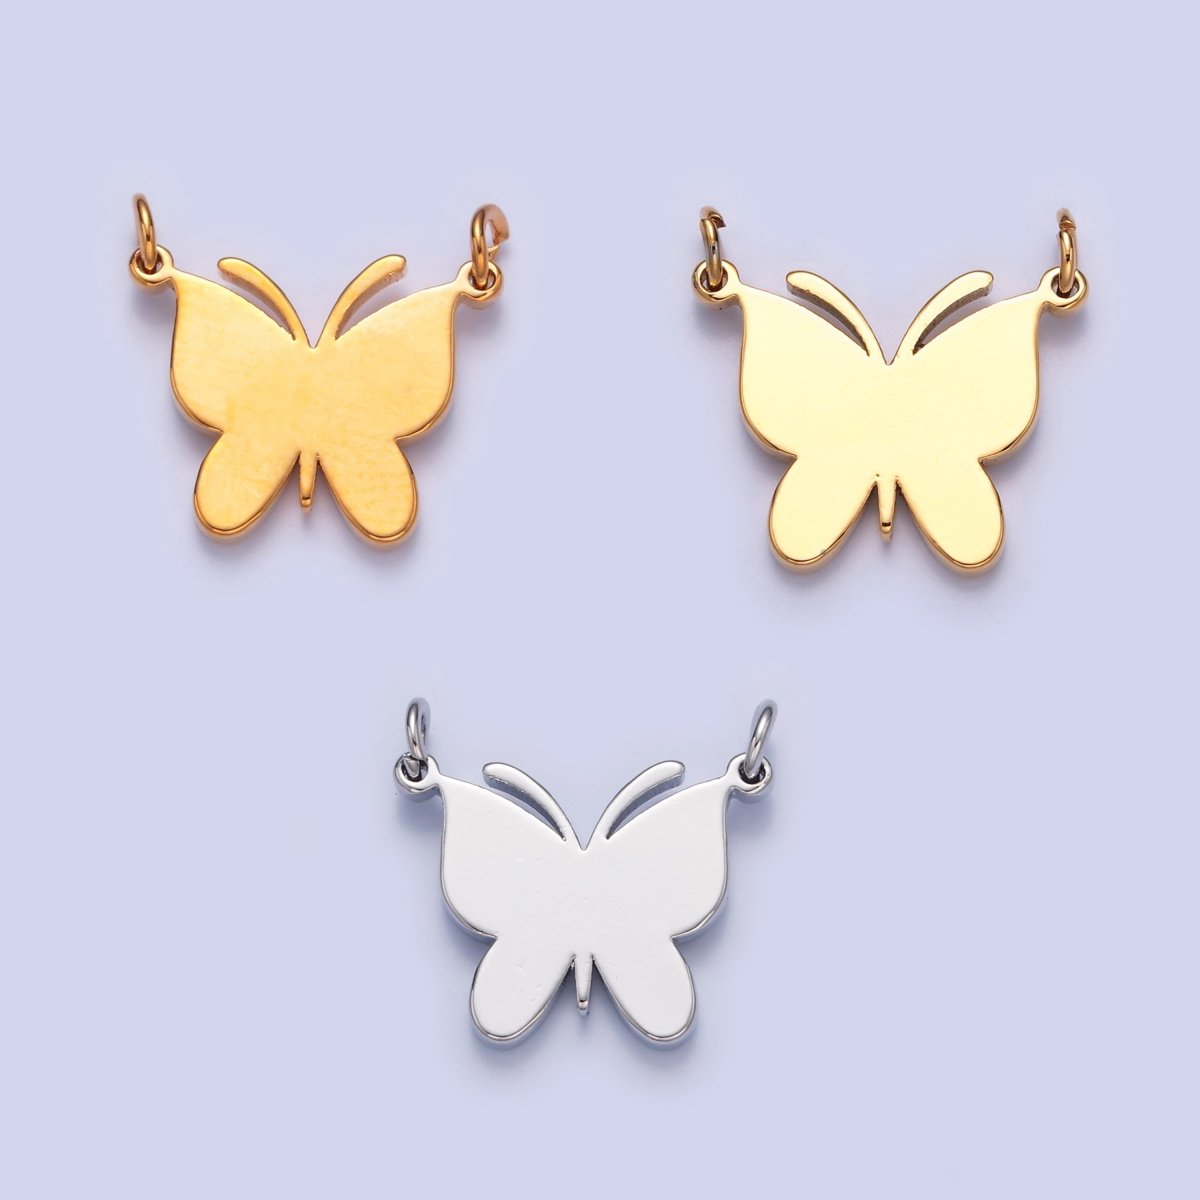 Dainty Gold Flat Butterfly Charm Connector Pendant for Necklace Bracelet 14K or 24K Gold Filled G-927 G-928 G-929 - DLUXCA